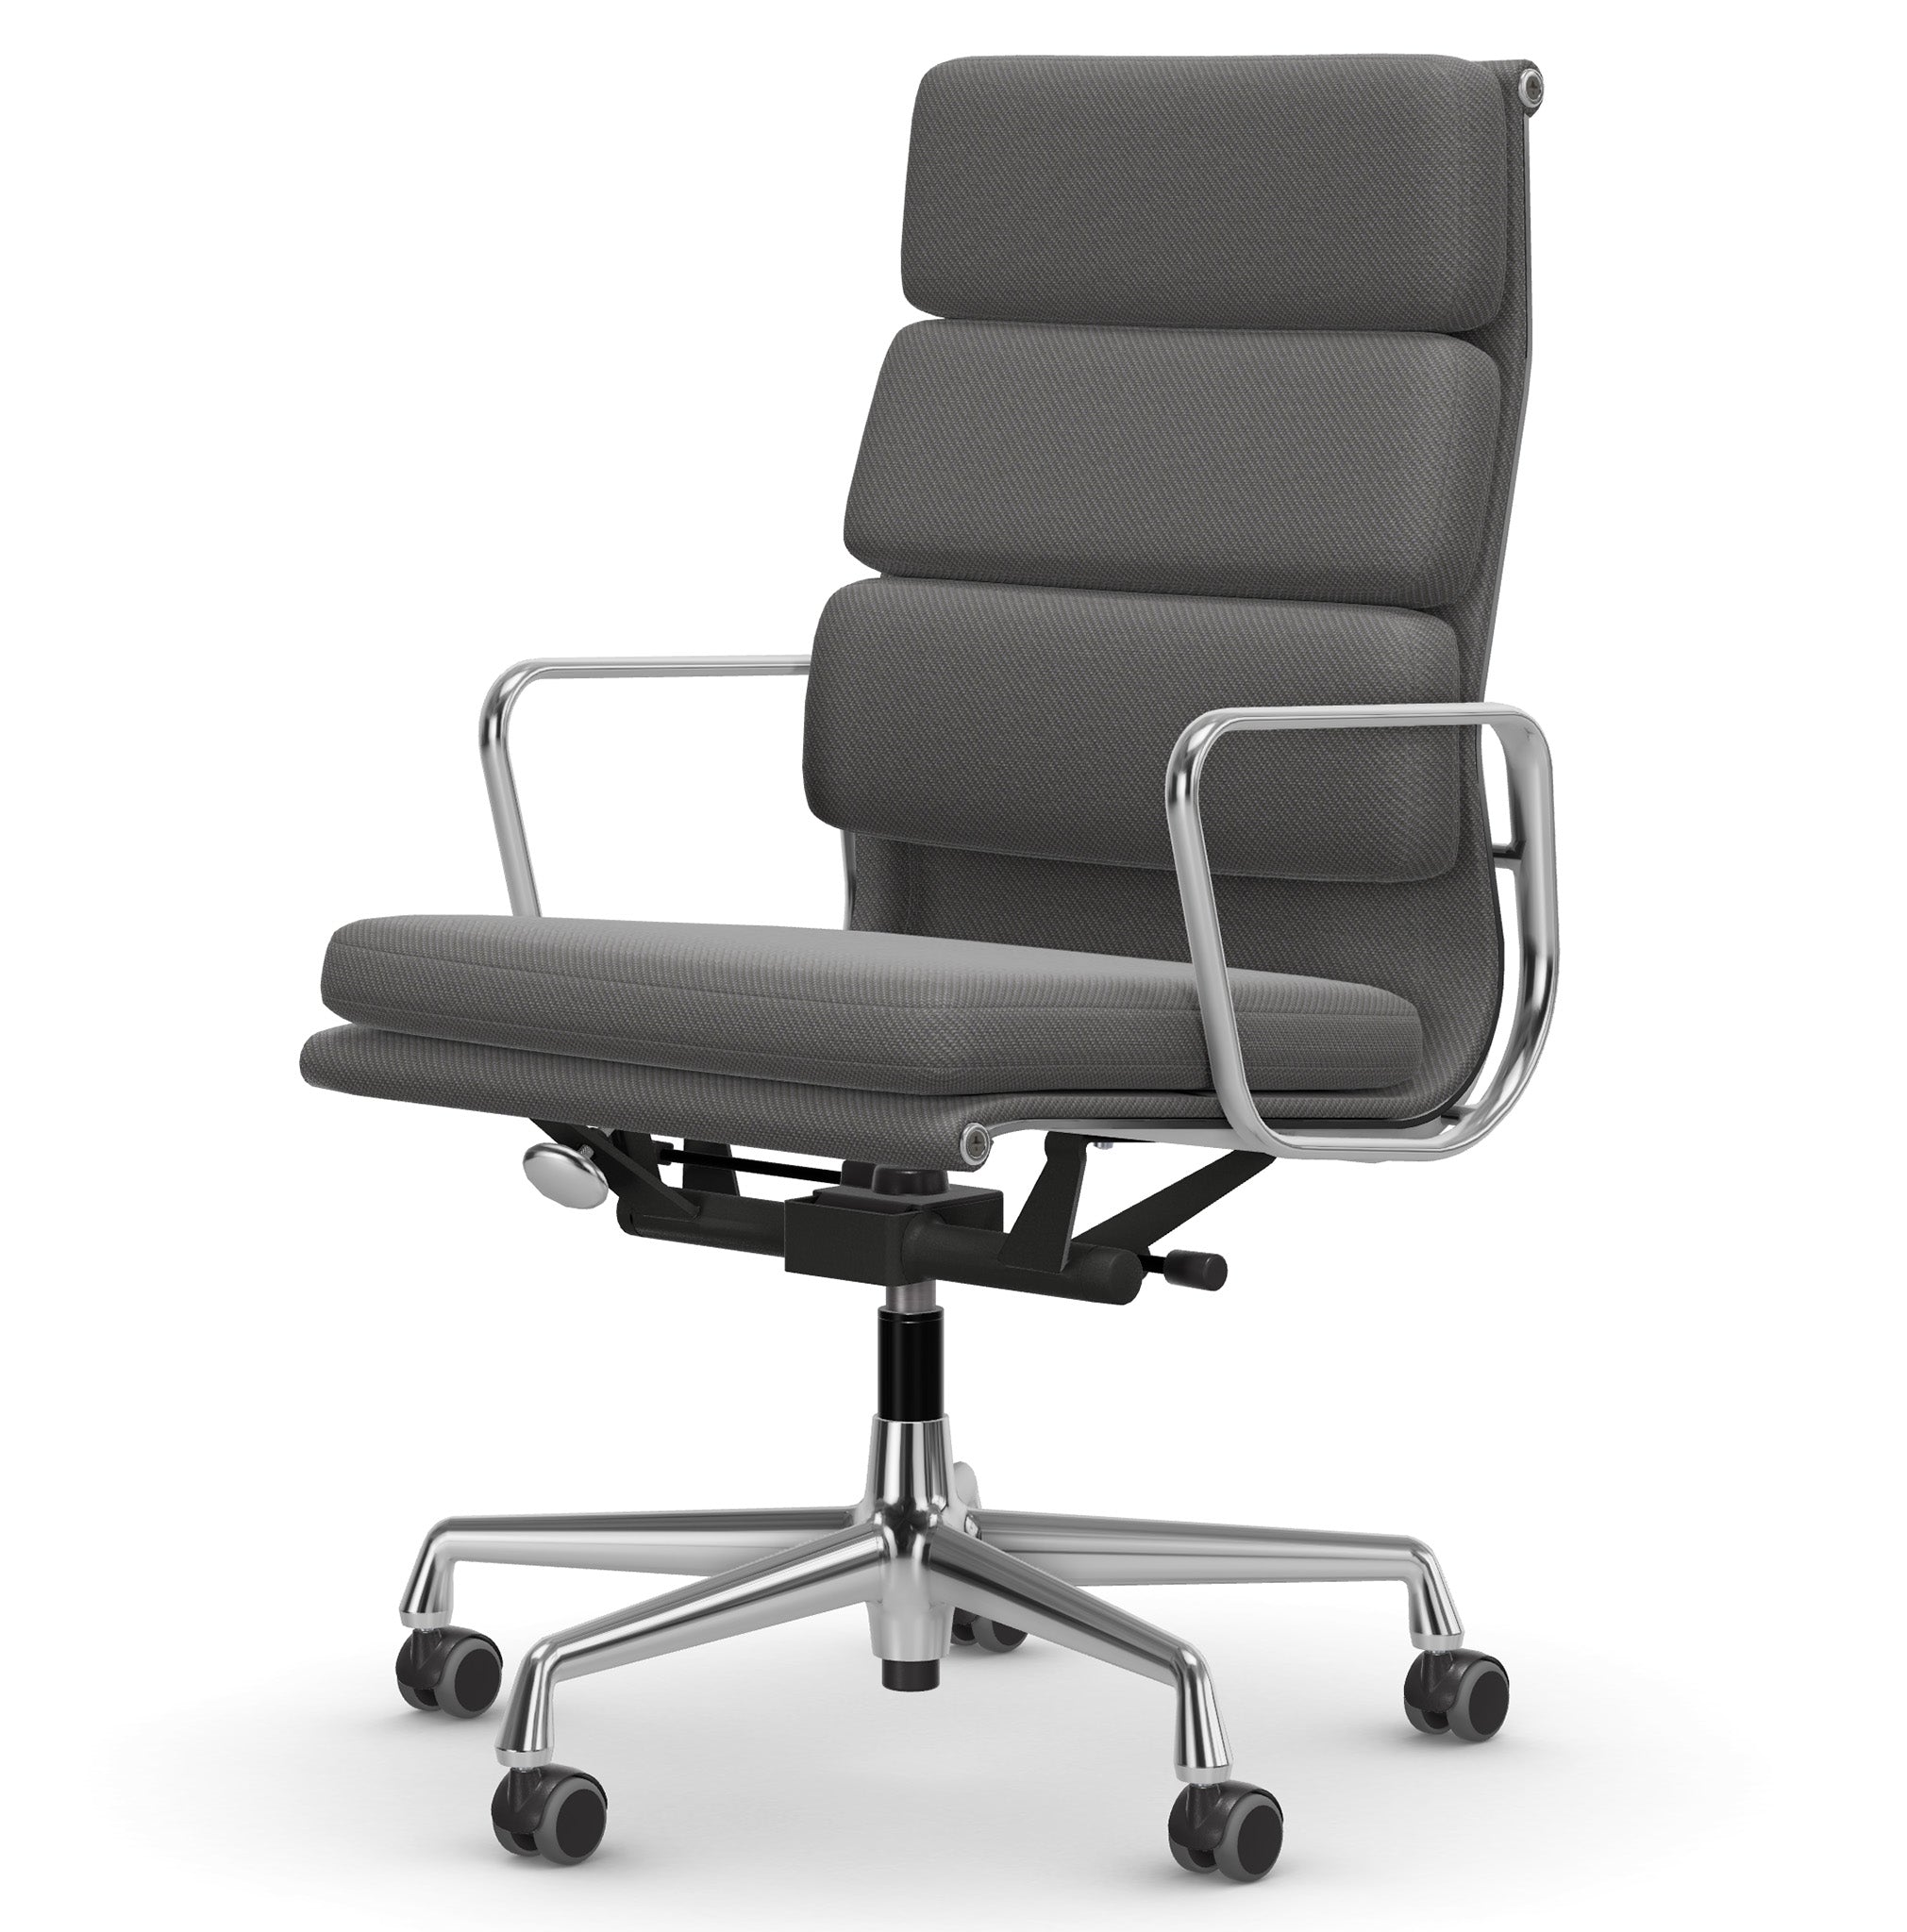 EA 219 Soft Pad Task Chair by Vitra